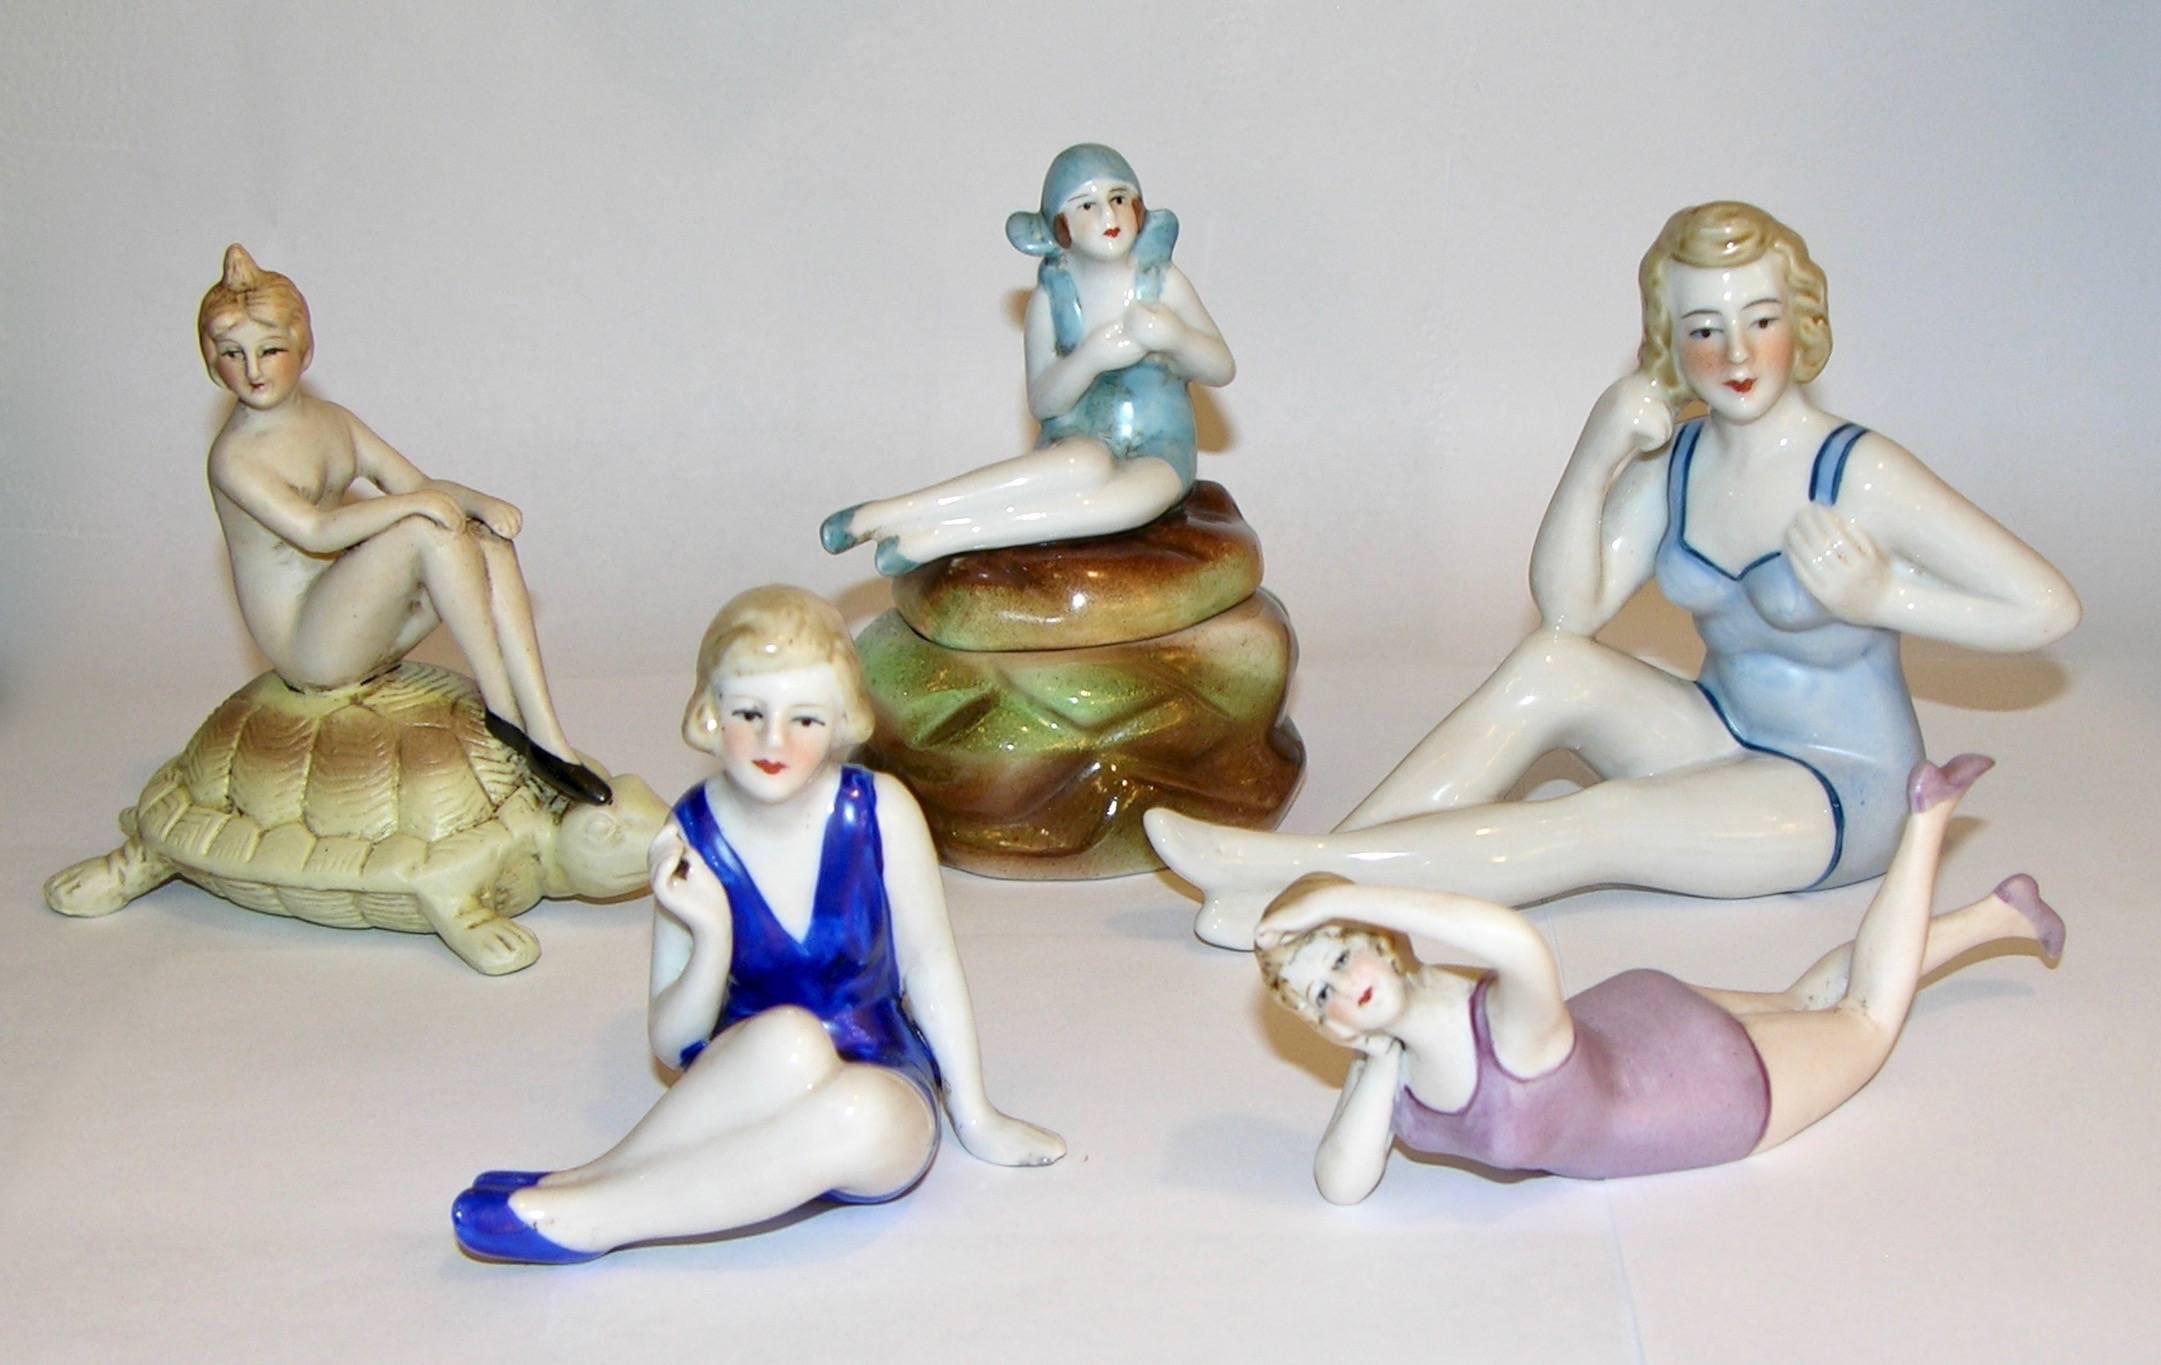 A delightful group of Art Deco ceramic female figure sculptures, each nicely detailed and hand-painted, representing bathing beauties in white and red, black, blue, light blue, yellow, pink bathing suits, in various poses, one seated on a tortoise,